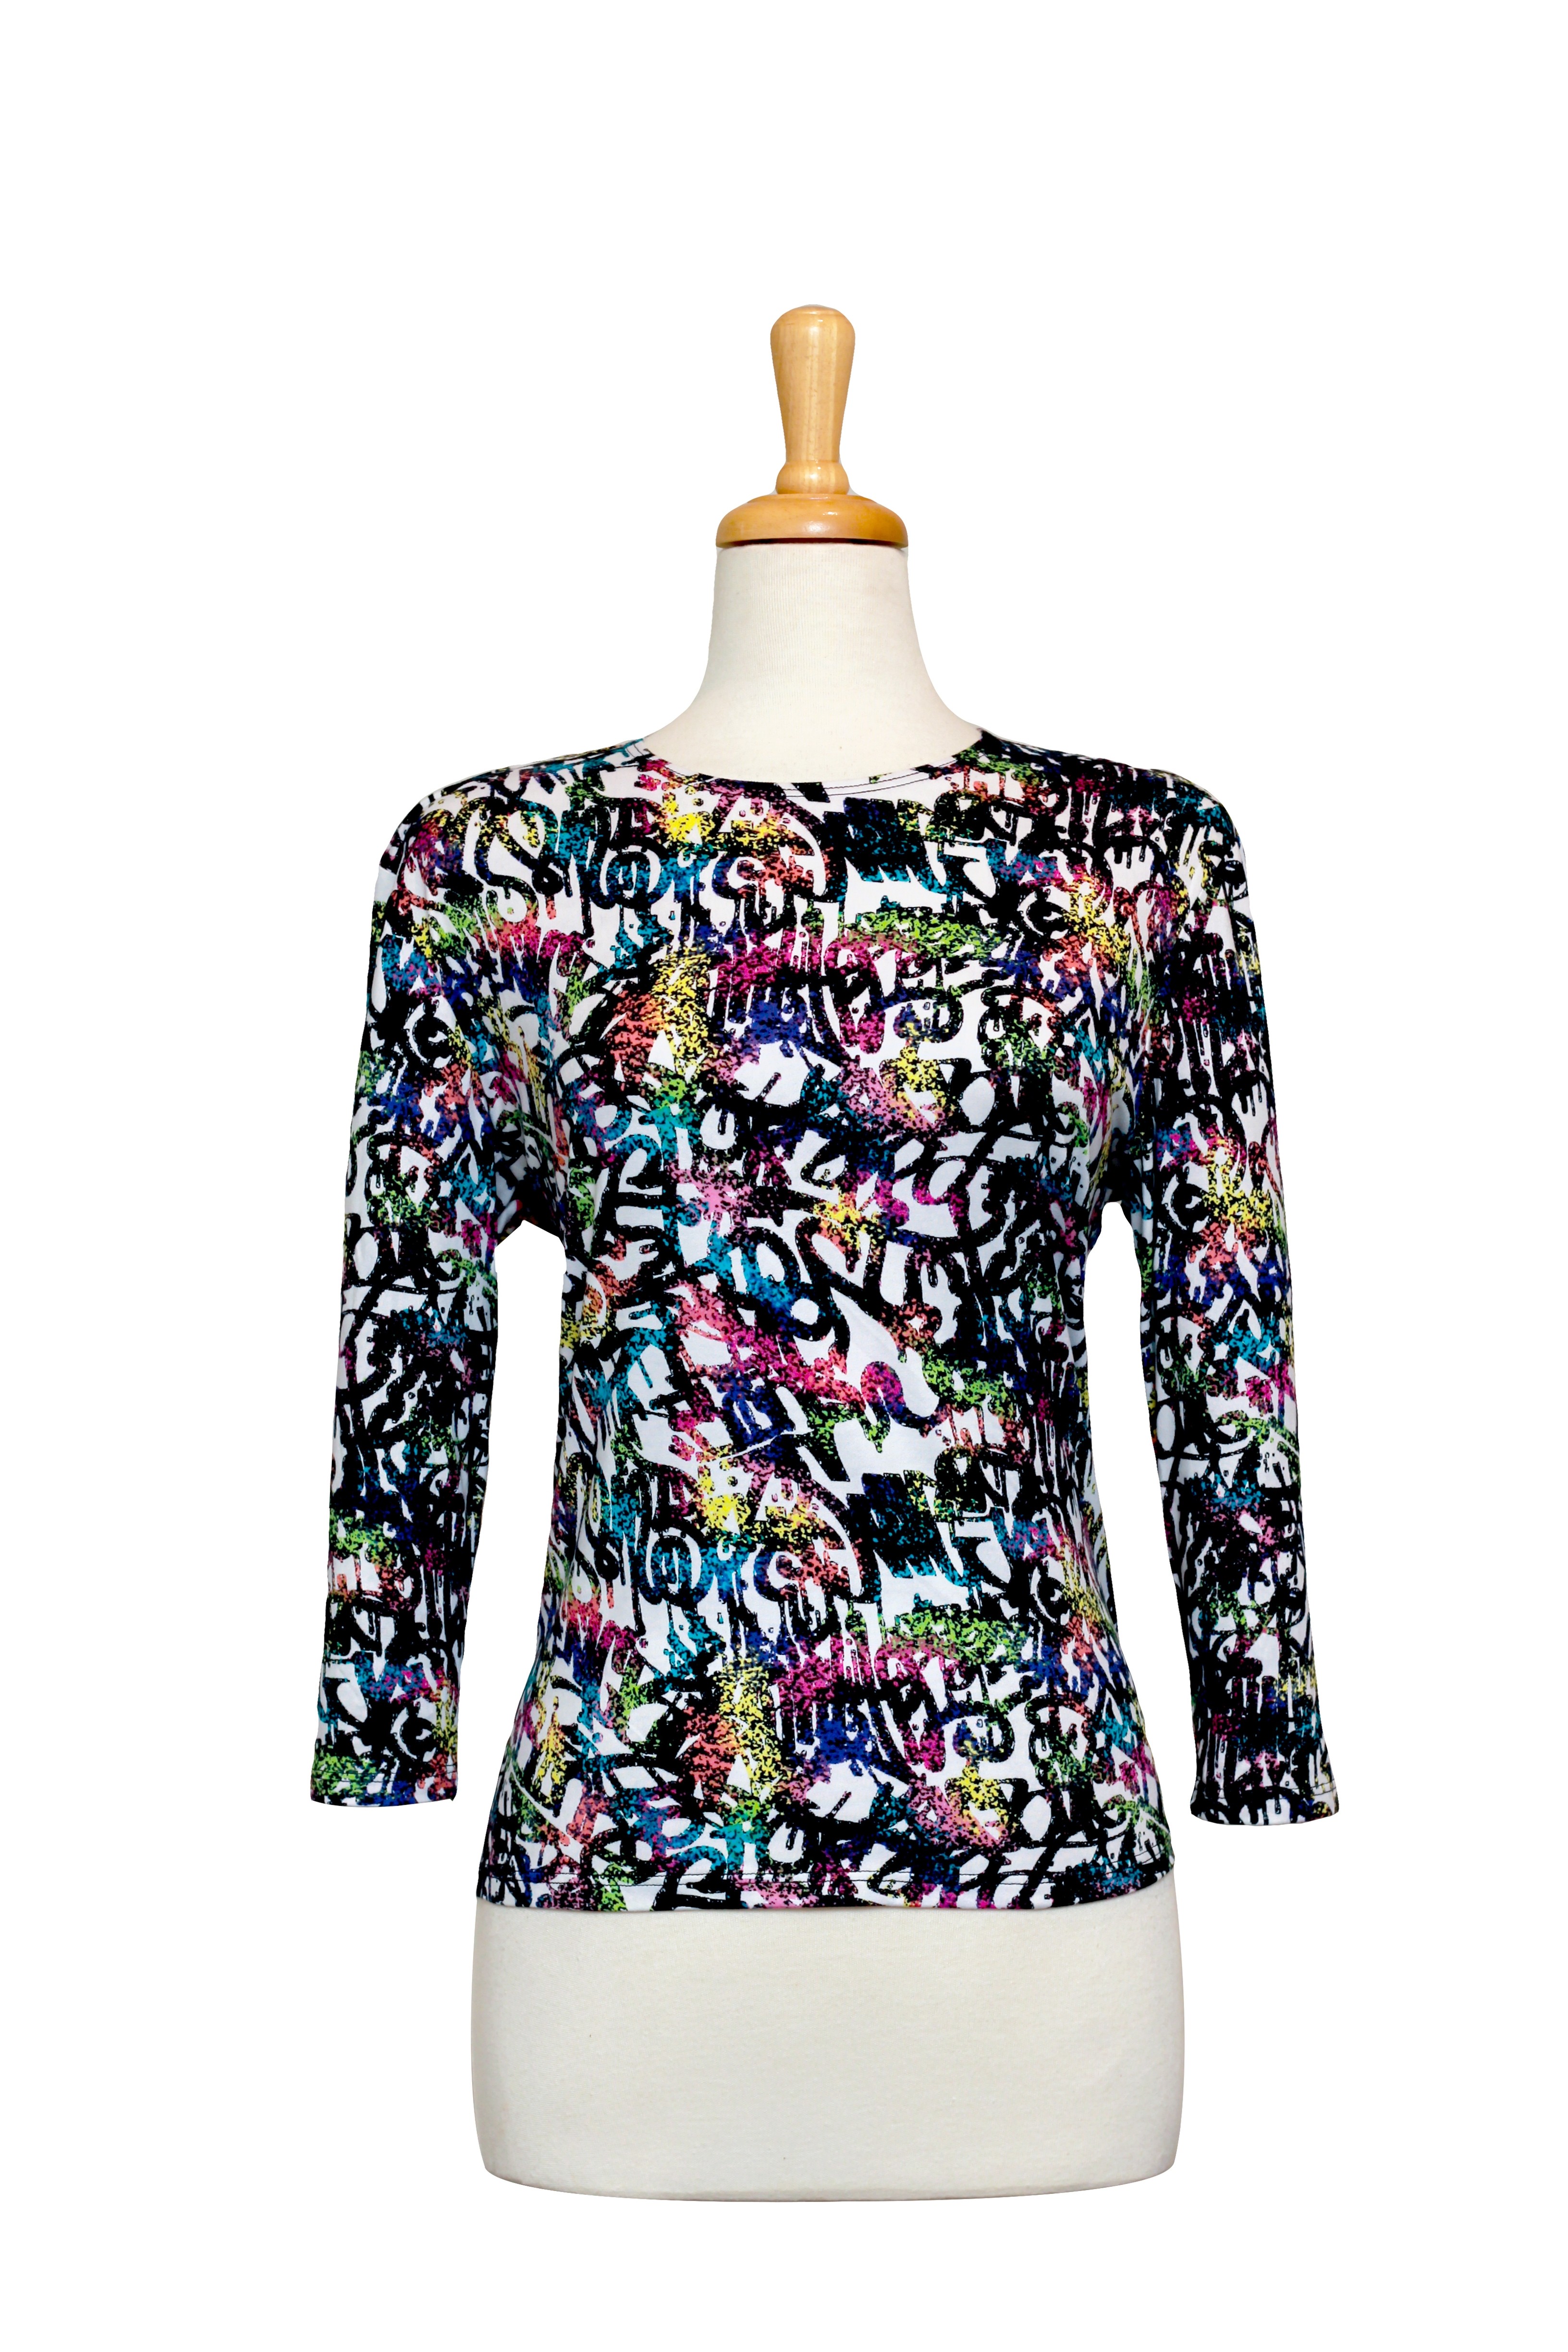 Black and White With Multi Color Graffiti Cotton 3/4 Sleeve Top 